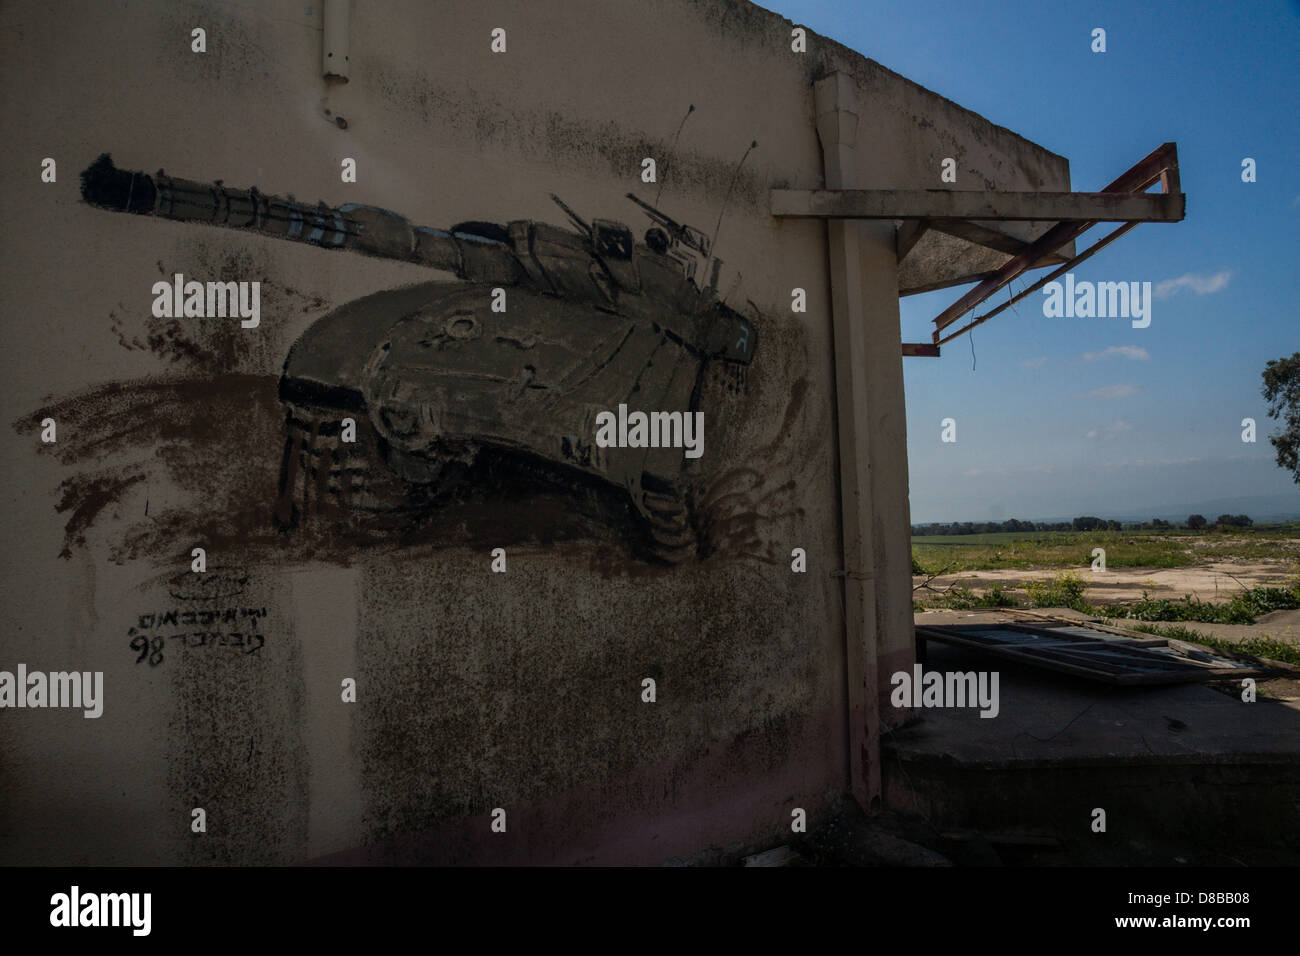 Golan Heights, Israel. A painting of a Israeli 'Merkava' tank on a building in an army training zone. Stock Photo